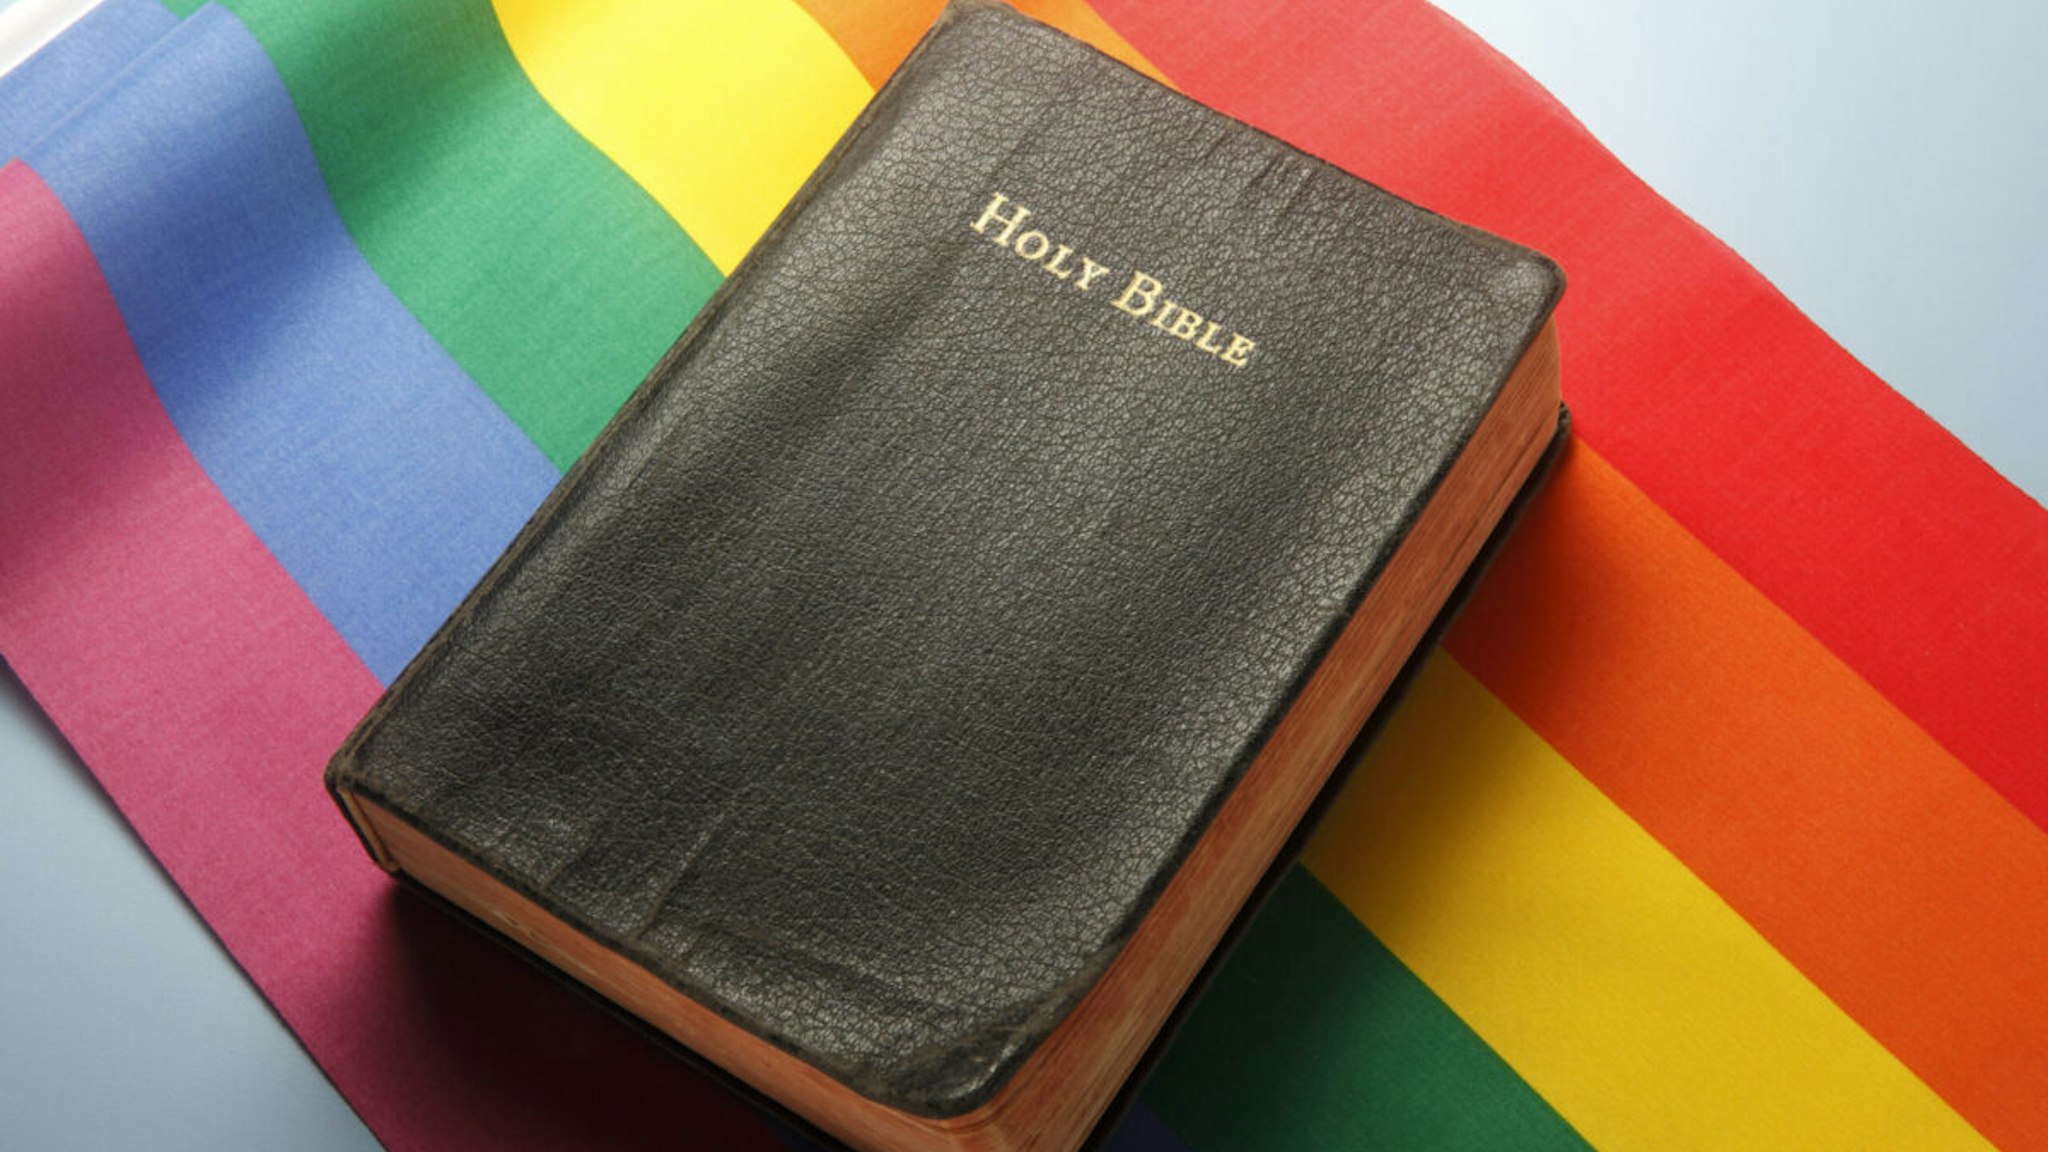 A Holy Bible sitting on top of a rainbow flag illustrating the conflicts between religion and LGBT issues.